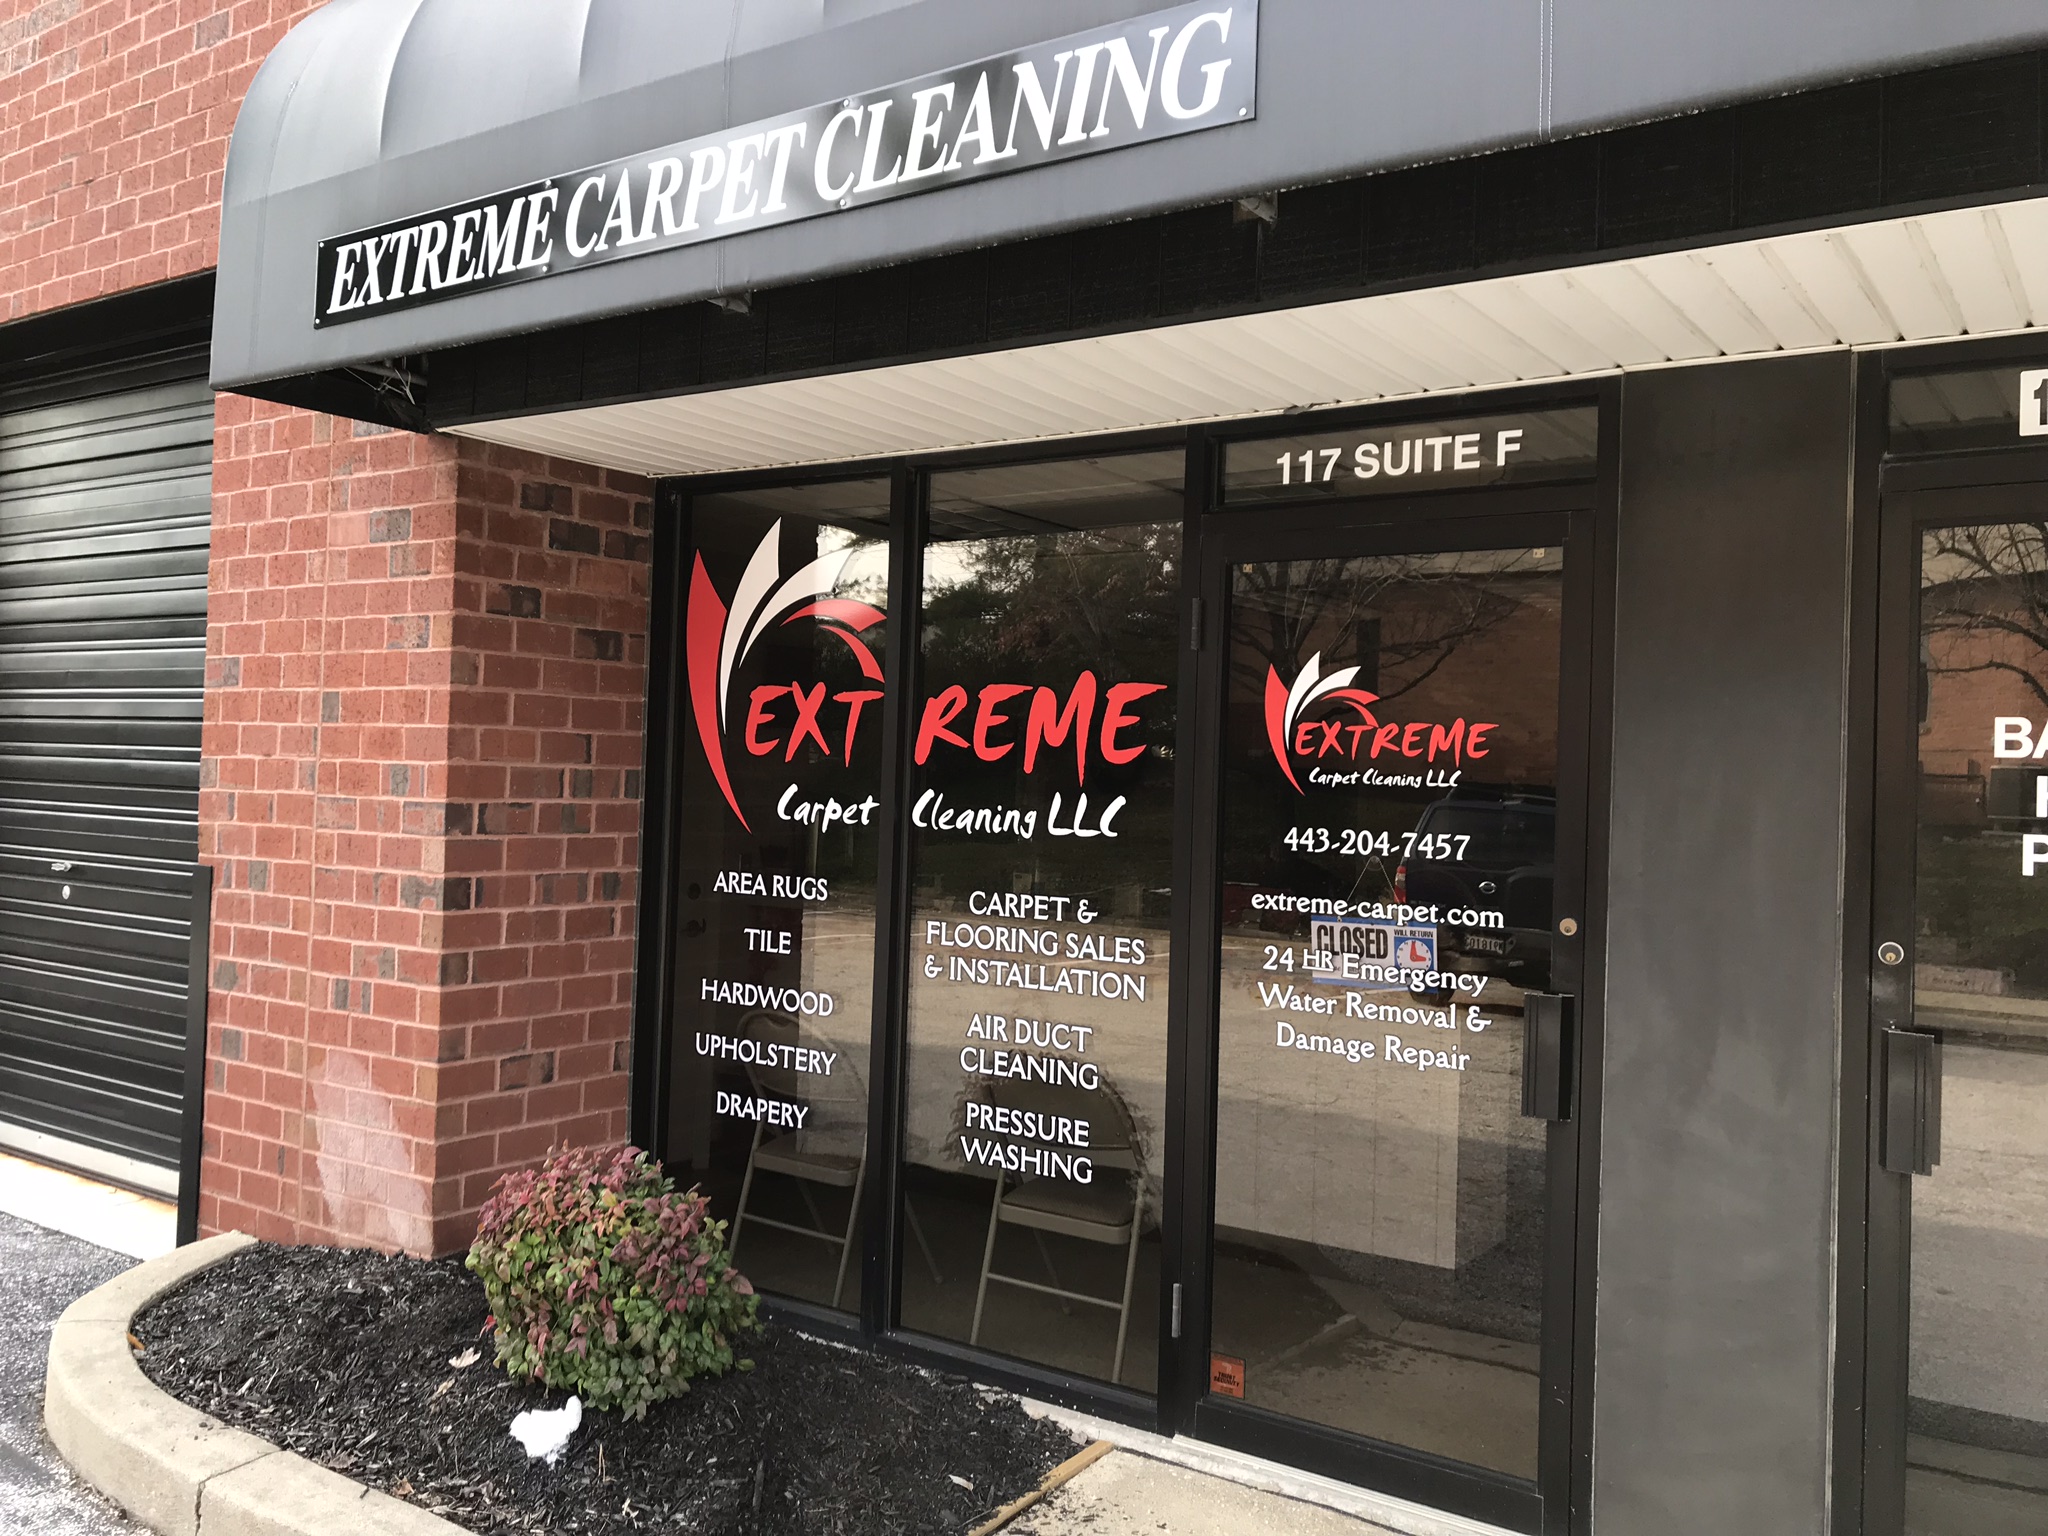 Extreme Carpet Cleaning Storefront